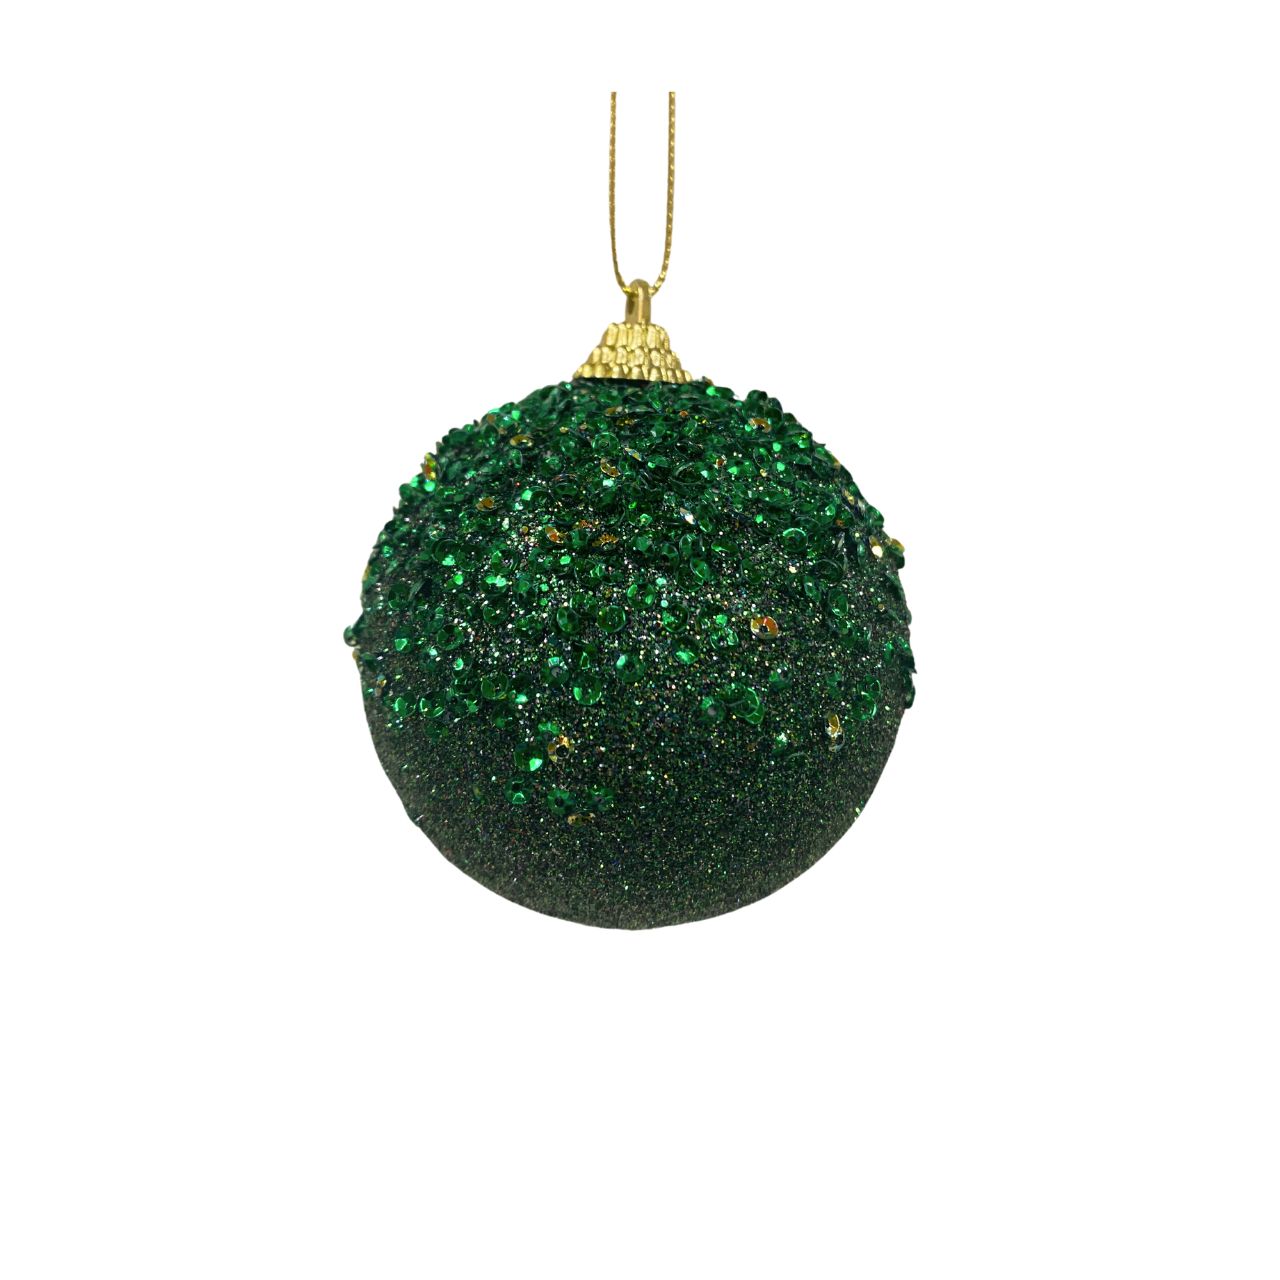 Kaemingk Christmas Foam Bauble With Sequins - Pine Green  Kaemingk surprises Christmas lovers all over the world with thousands of new innovative items each year. They specialises in beautifully detailed Christmas Ornaments and holiday seasonal décor. The catchy collections are contemporary, attractive and of high quality.